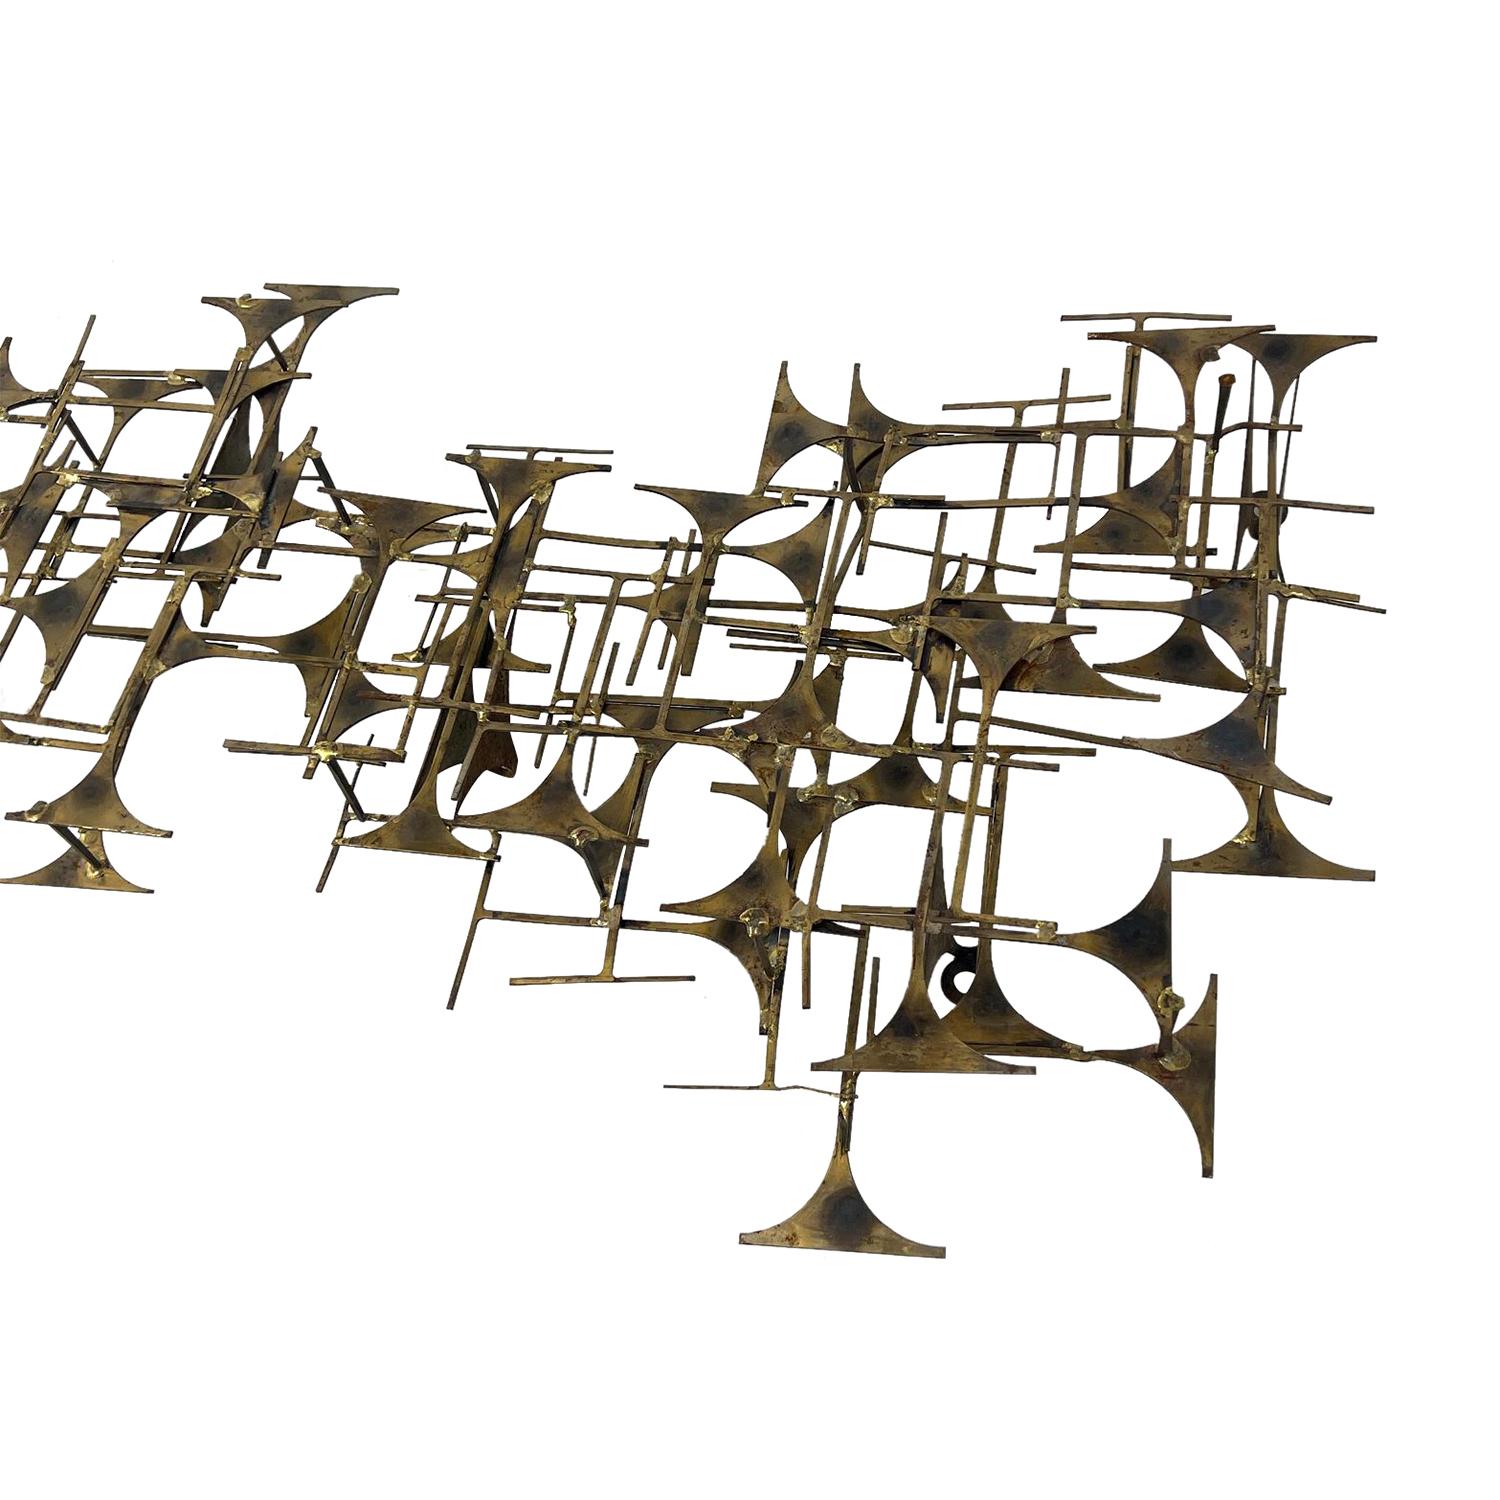 Gilt 20th Century American Abstract Gilded Metal Wall Sculpture by Marc Weinstein